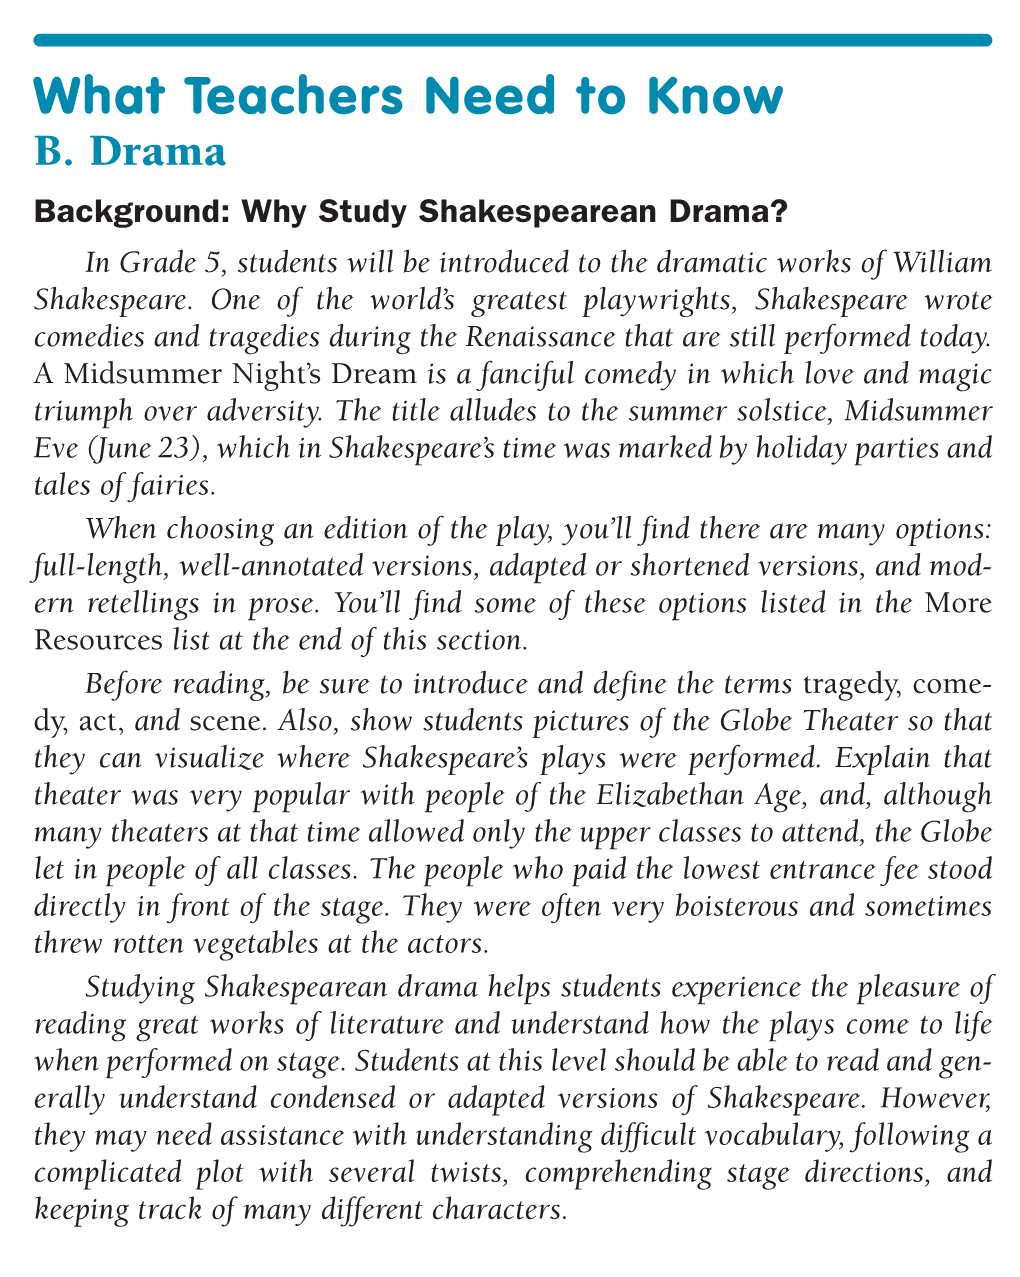 About Shakespeare